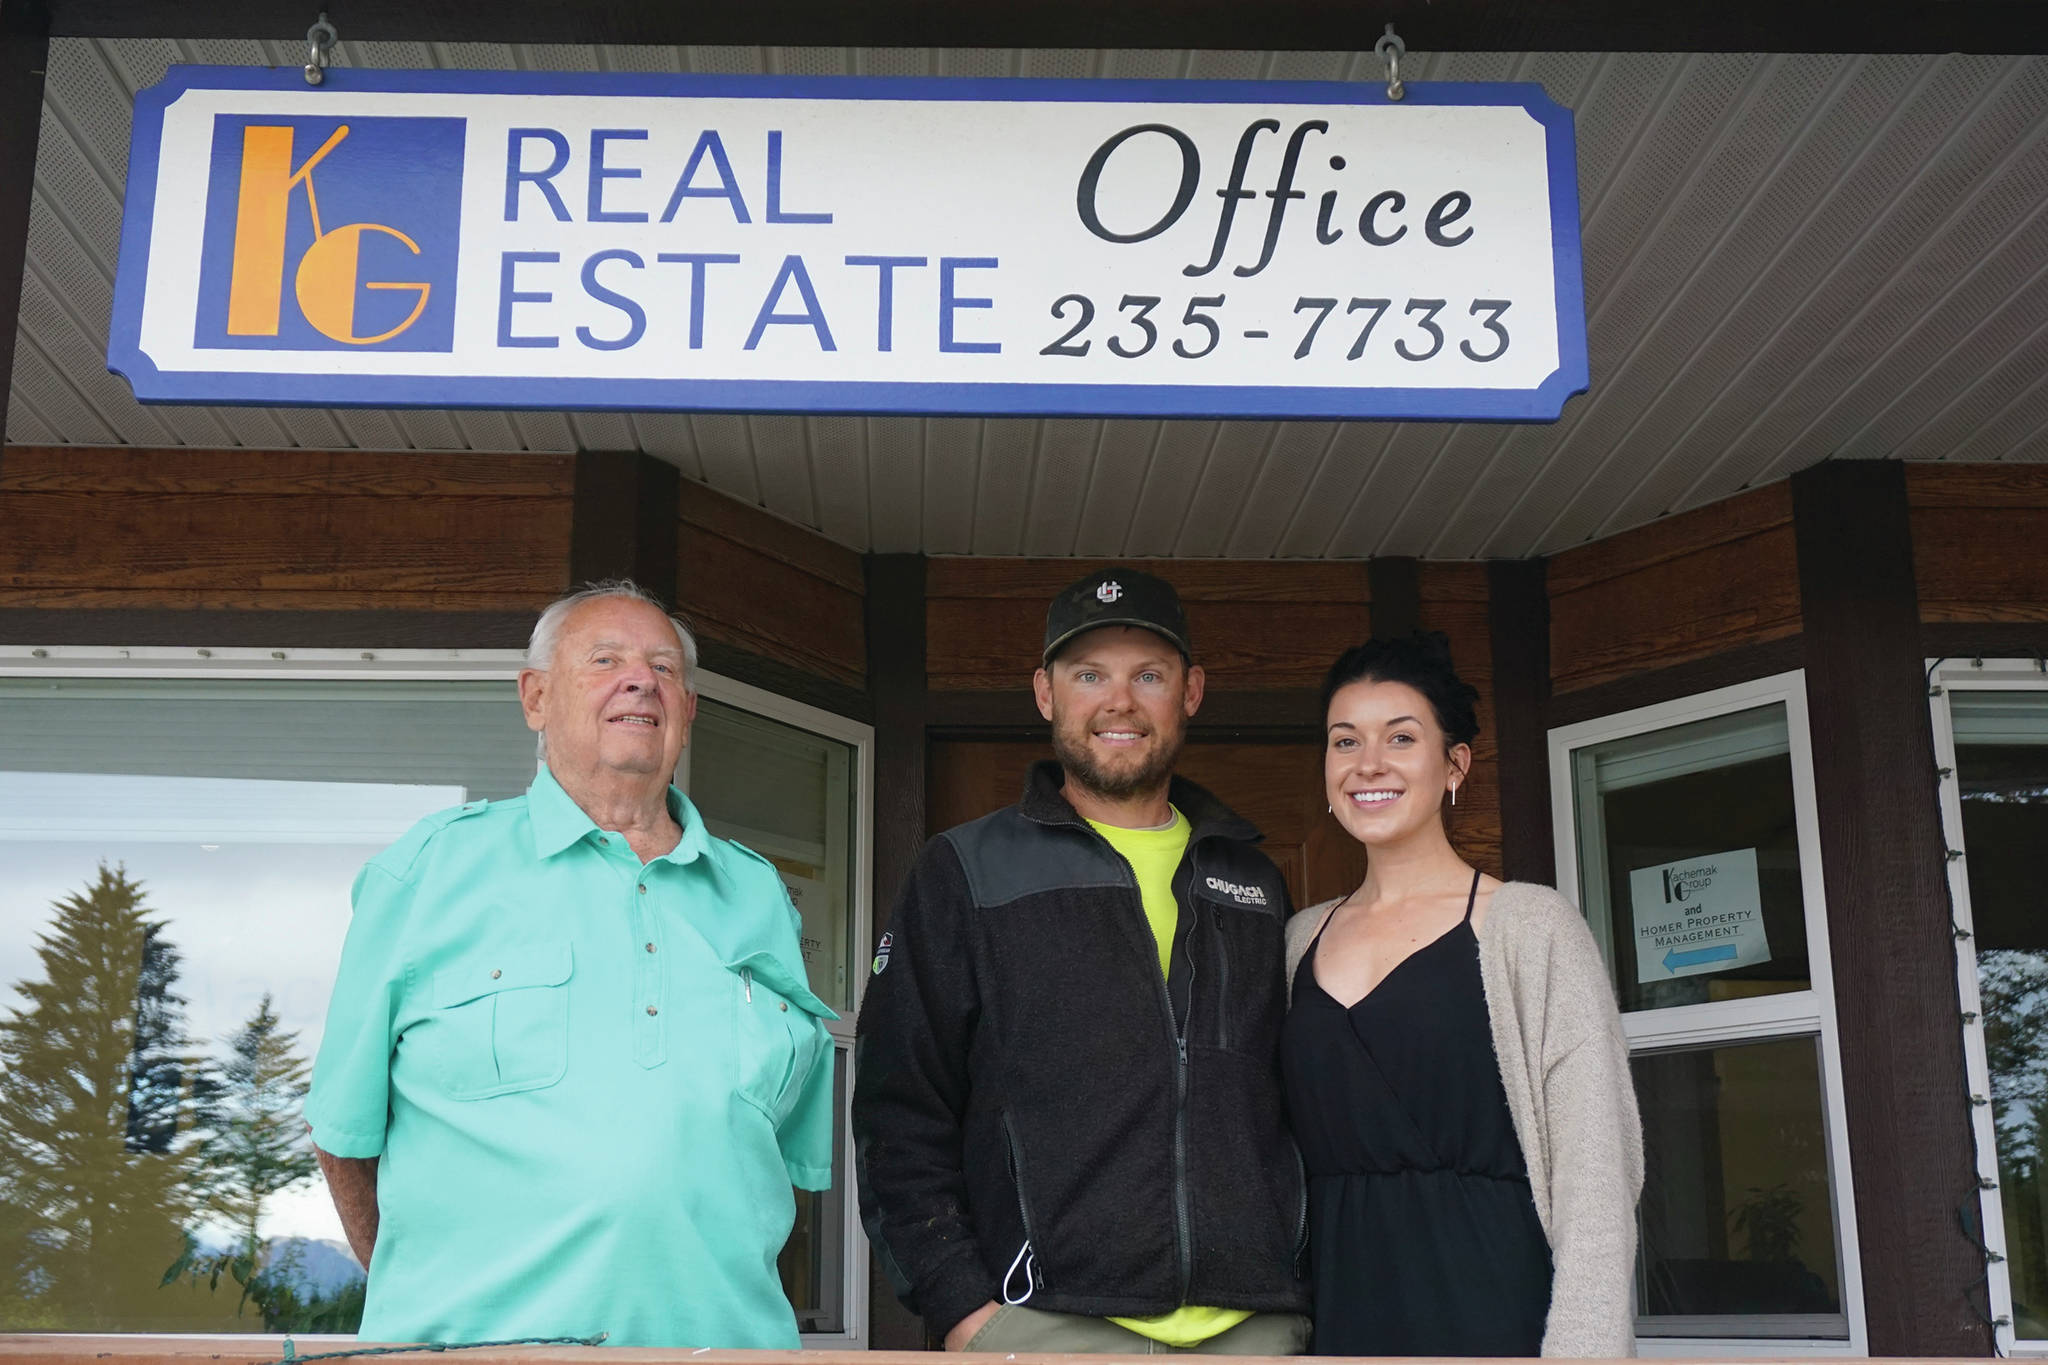 Terry Yager, left, poses with new Kachemak Group Realty owner Valerie Buss, far right, and her husband, Bryce Buss, center, on Tuesday, Sept, 15. 2020, at the agency’s office on West Pioneer Avenue in Homer, Alaska. (Photo by Michael Armstrong/Homer News)